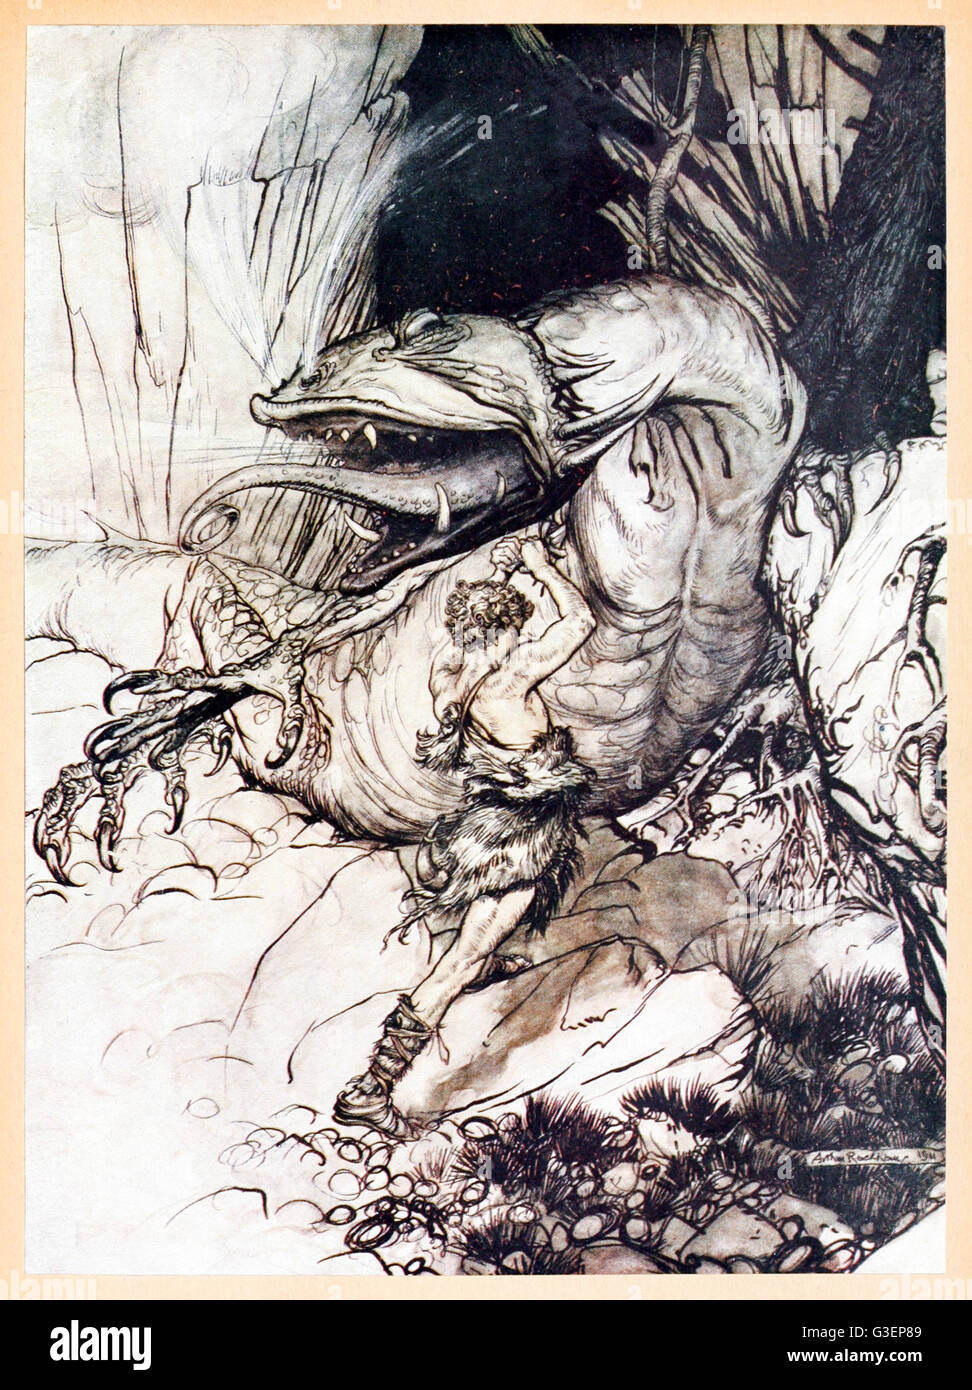 “Siegfried kills Father” from 'Siegfried & The Twilight of the Gods' illustrated by Arthur Rackham (1867-1939). Siegfried stabs the giant Fafner who has transformed into a dragon with the sword Nothung. See description for more information. Stock Photo